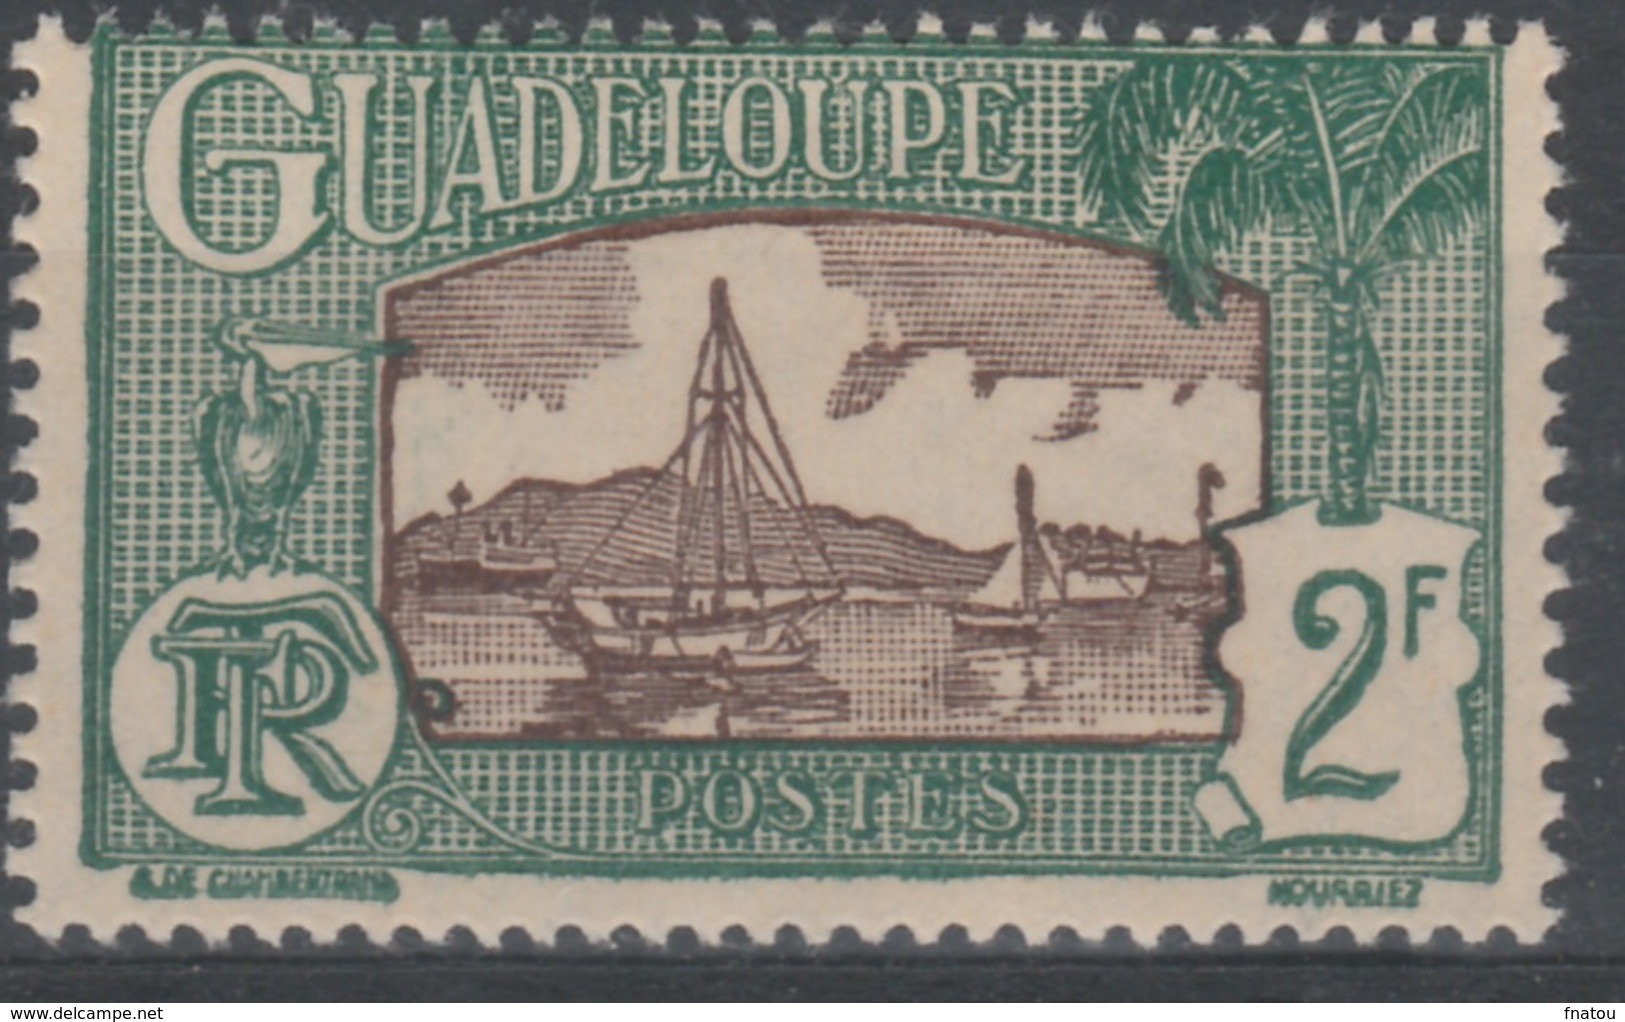 Guadeloupe, Pointe-à-Pitre Harbour, 2f., 1928, MH VF - Unused Stamps